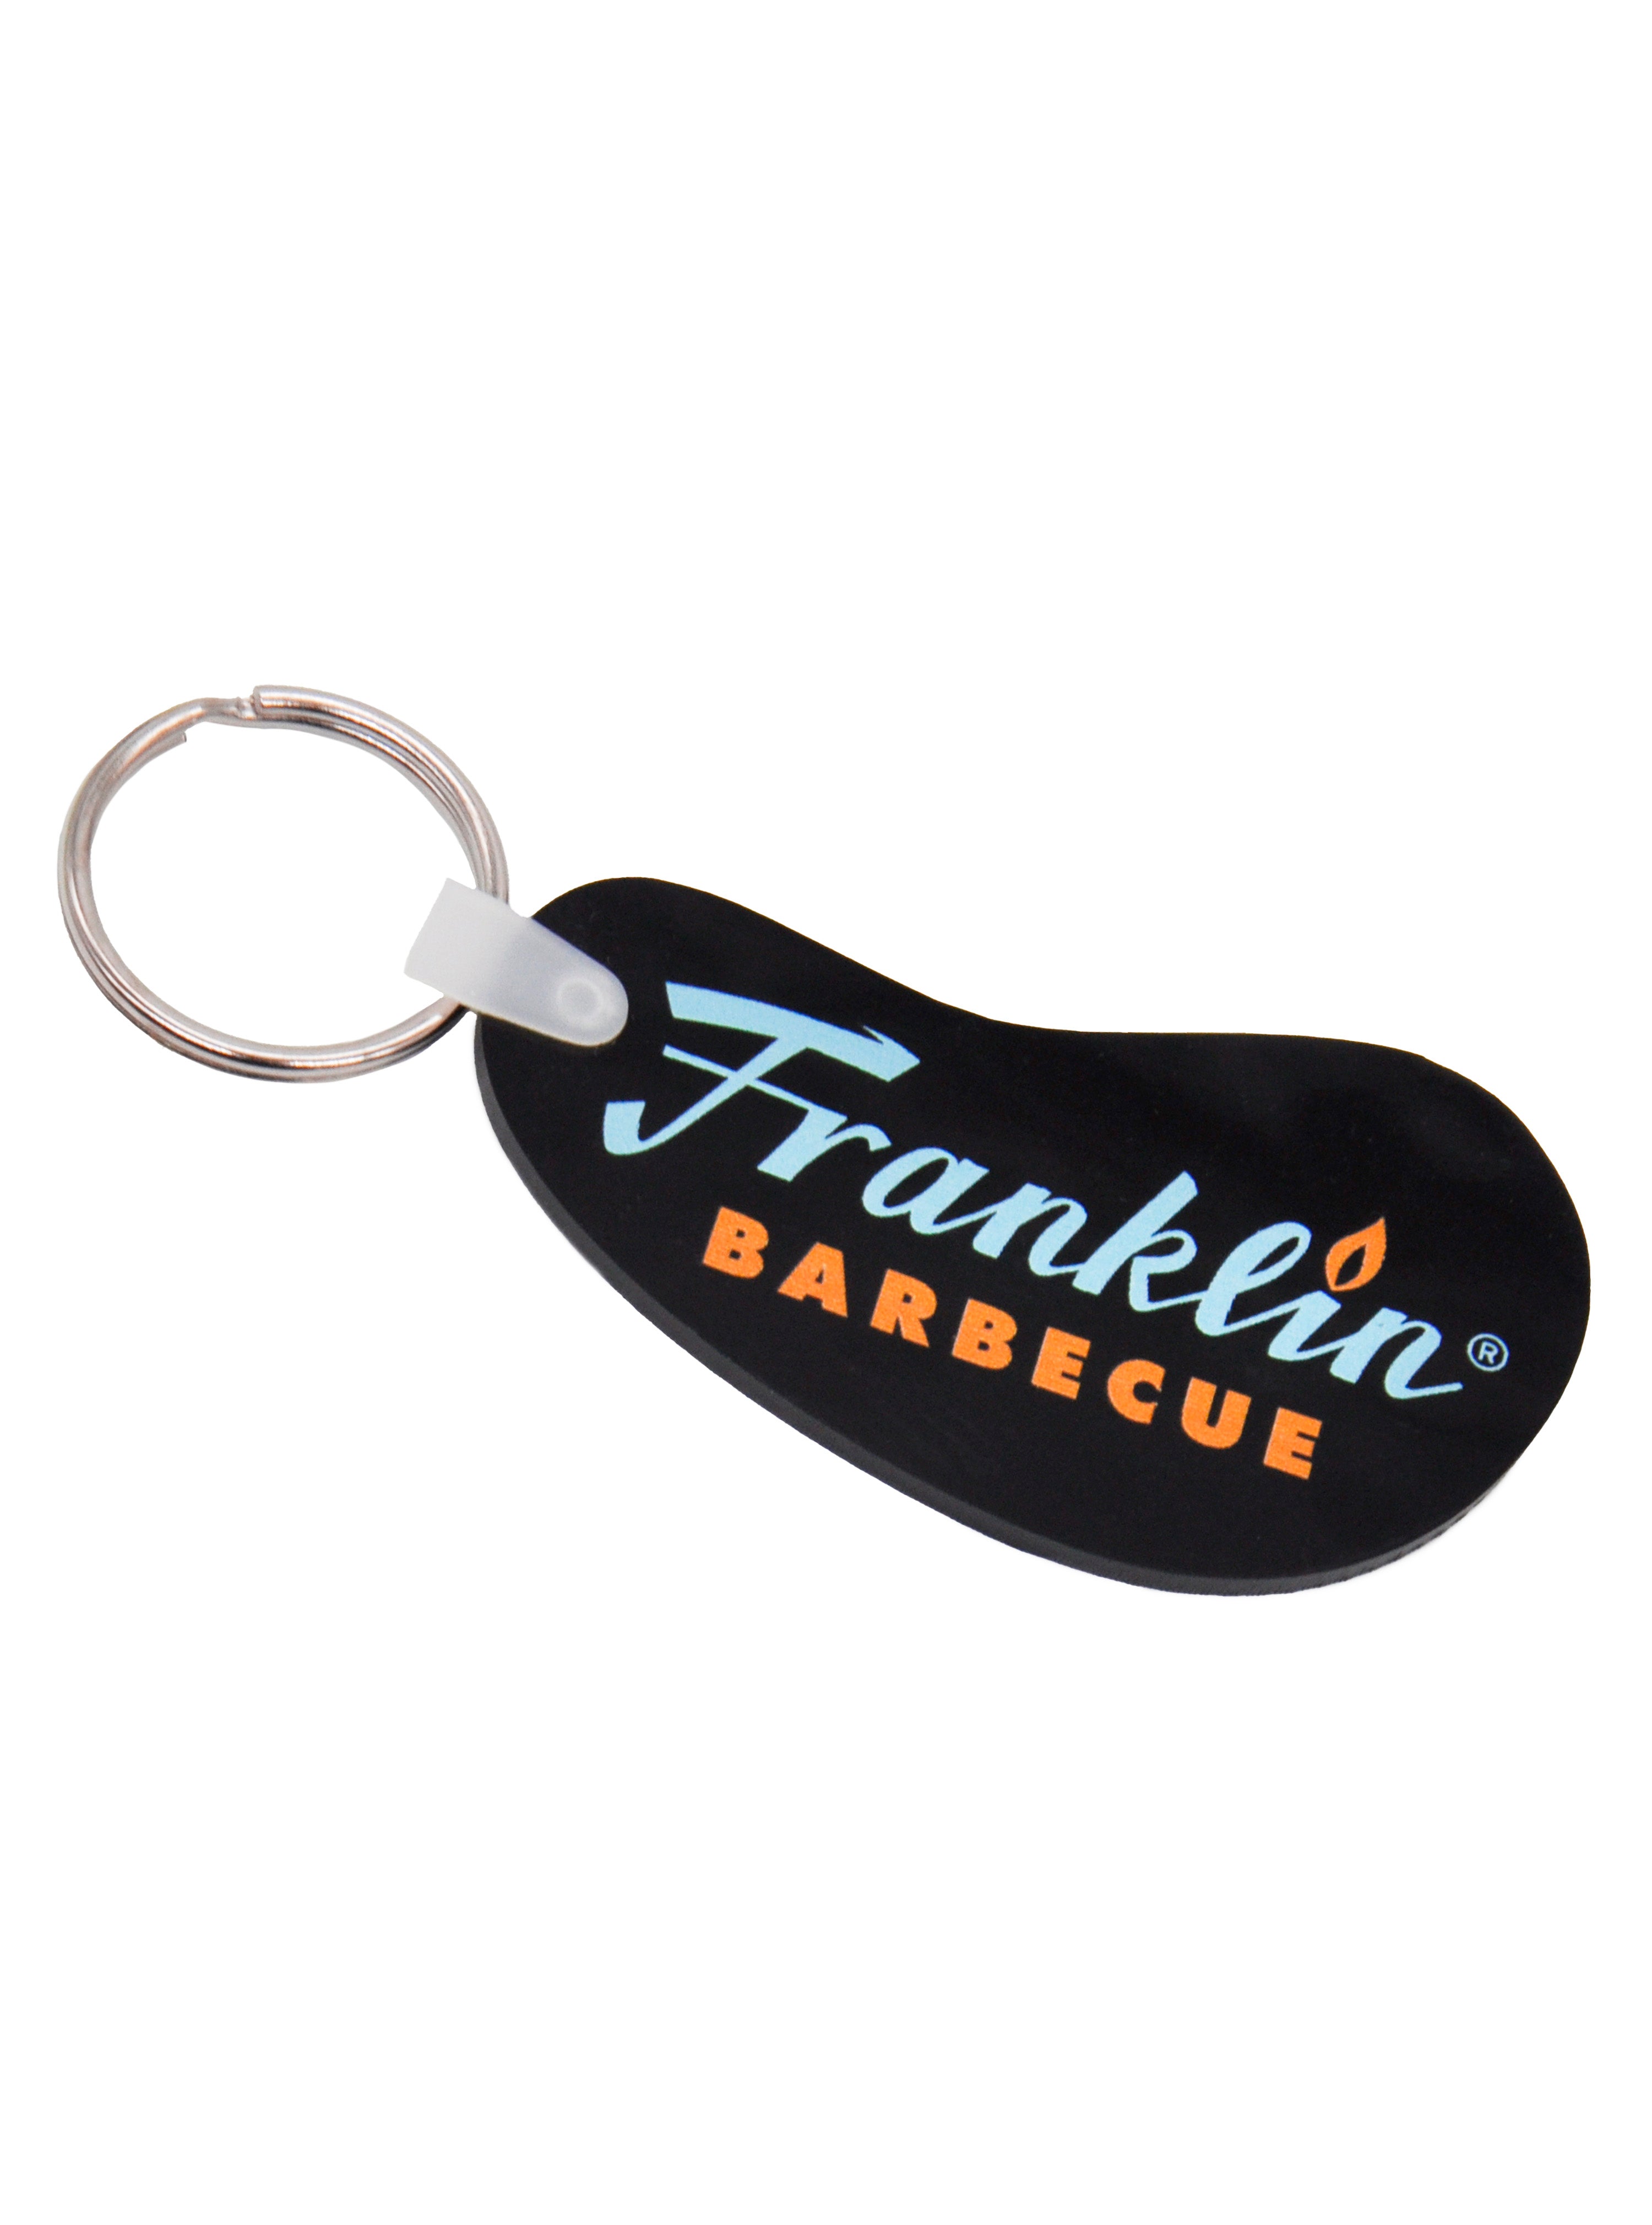 Black bean shaped vinyl keychain with blue and orange Franklin Barbecue logo. A silver metal key ring on the left side.